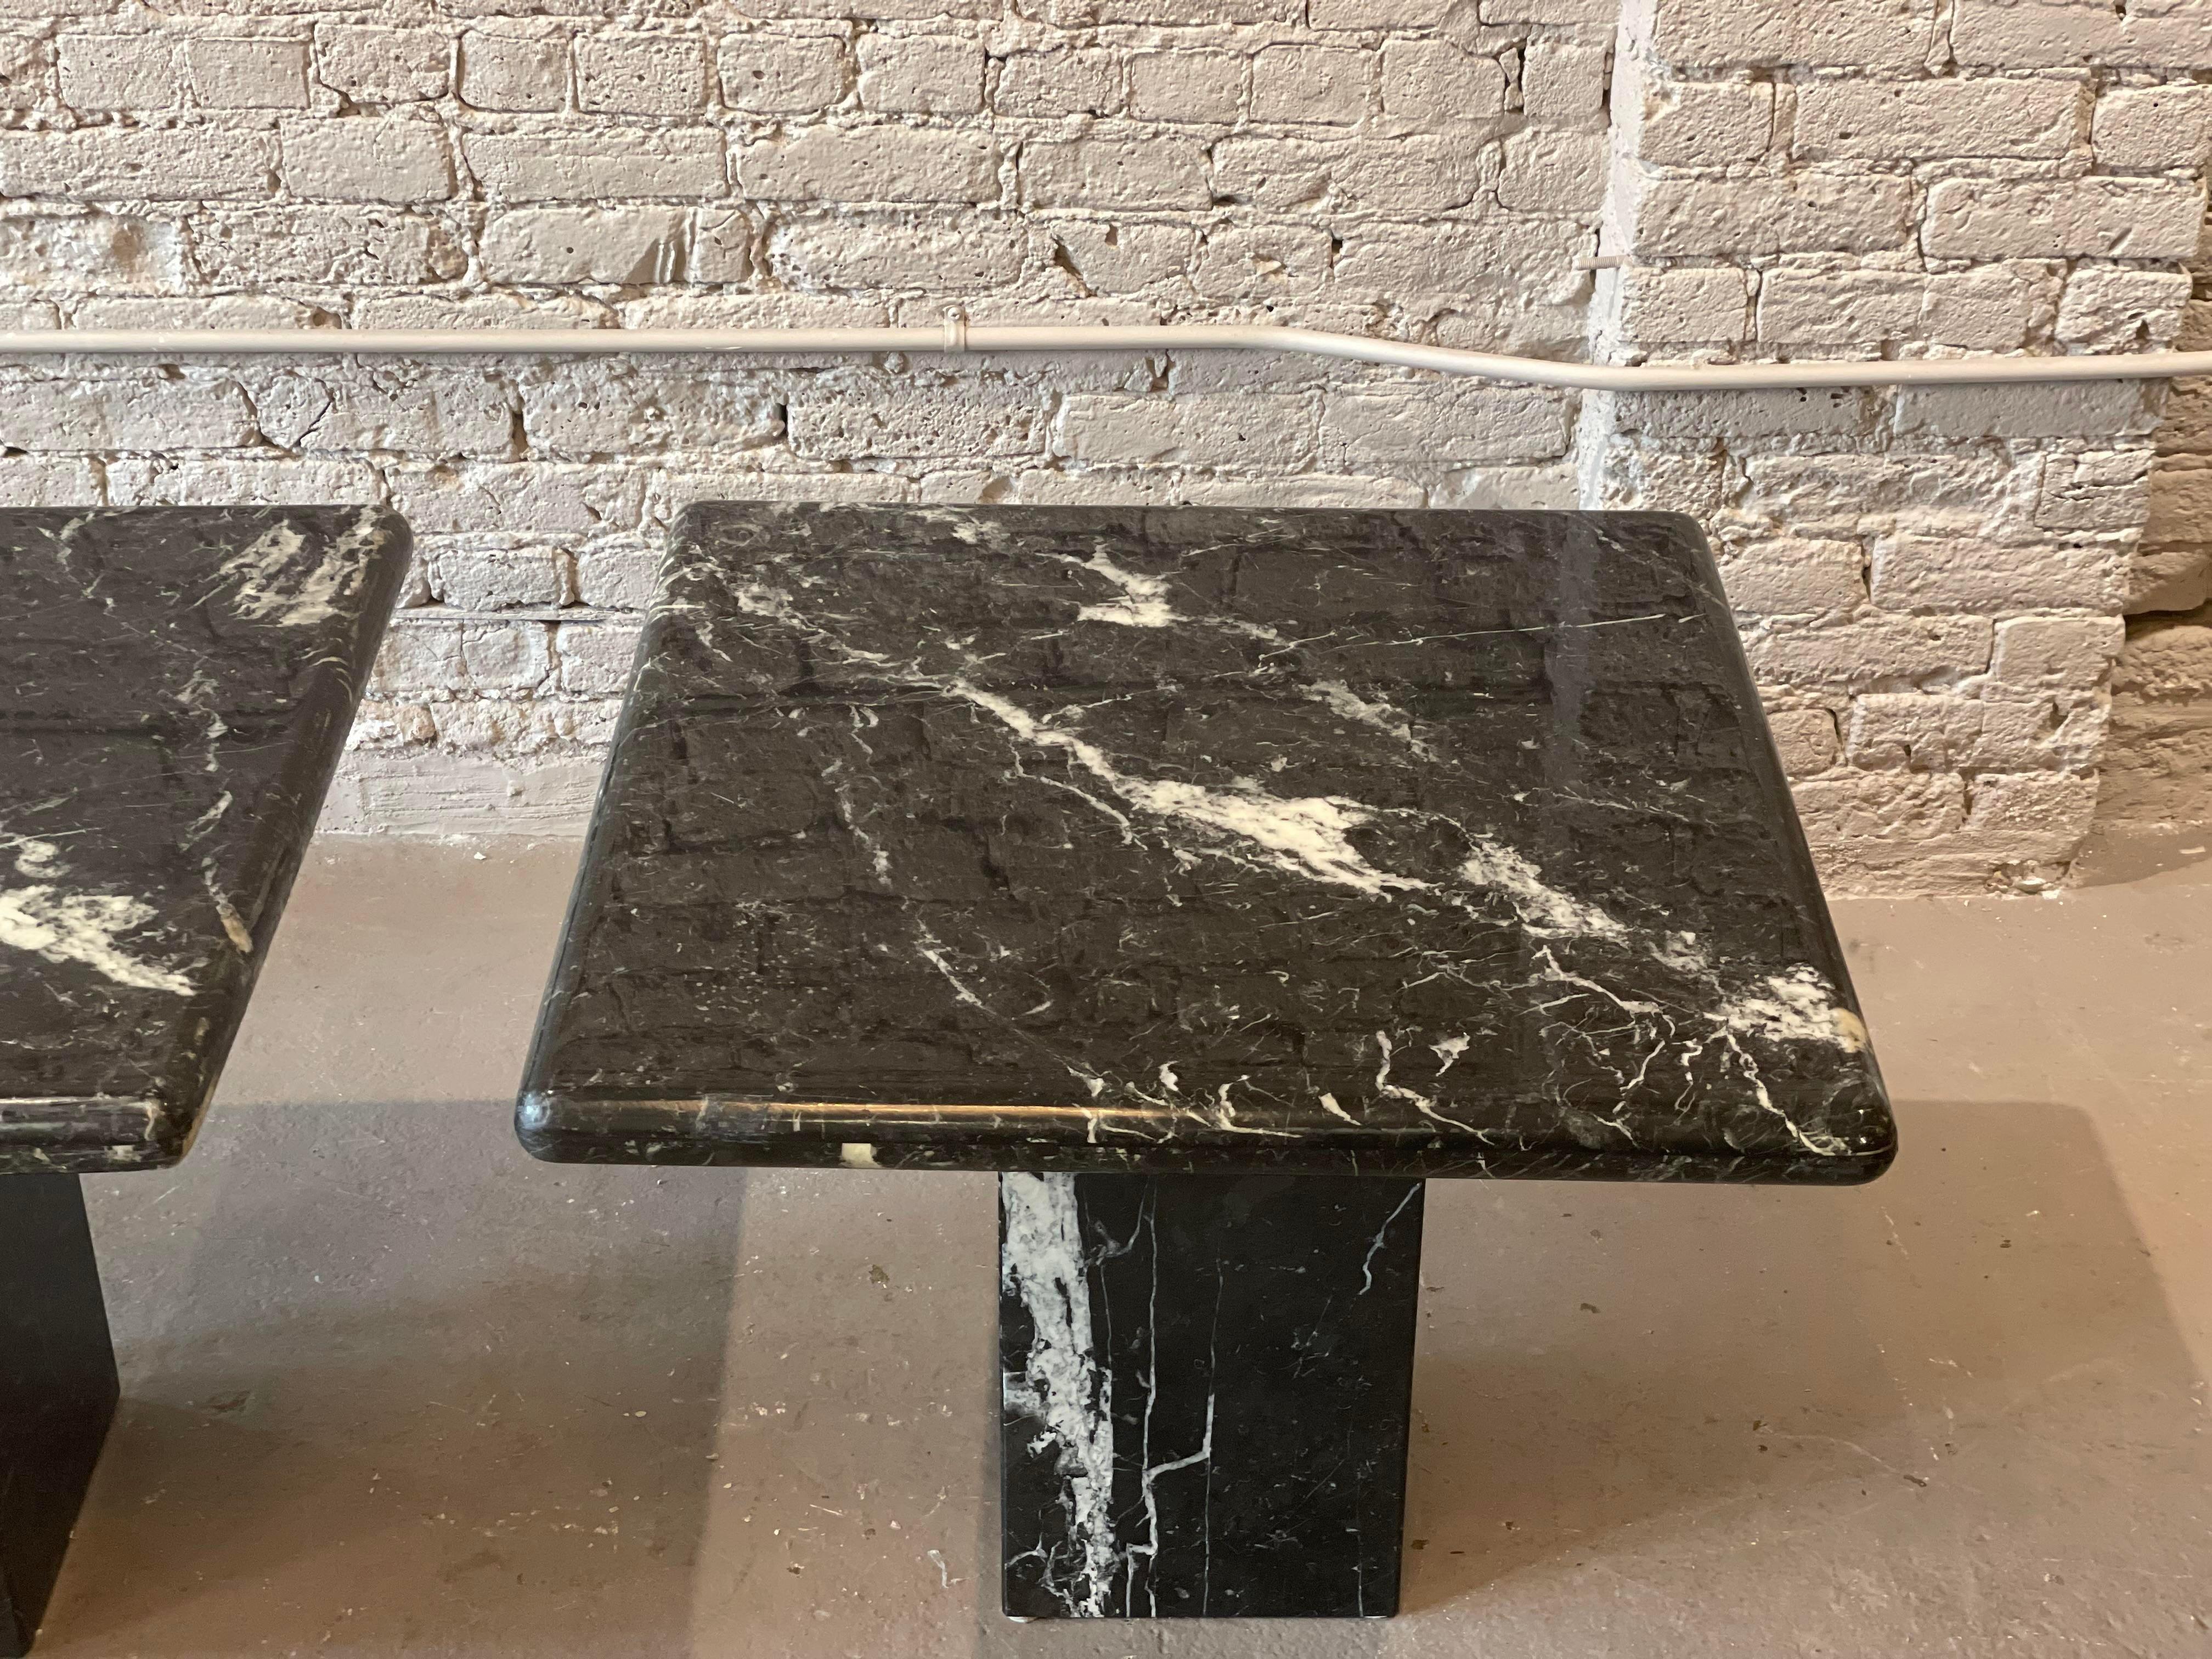 Beautiful pair of Nero Marquina tables. Absolutely love the veining. The original lacquer is in excellent condition.